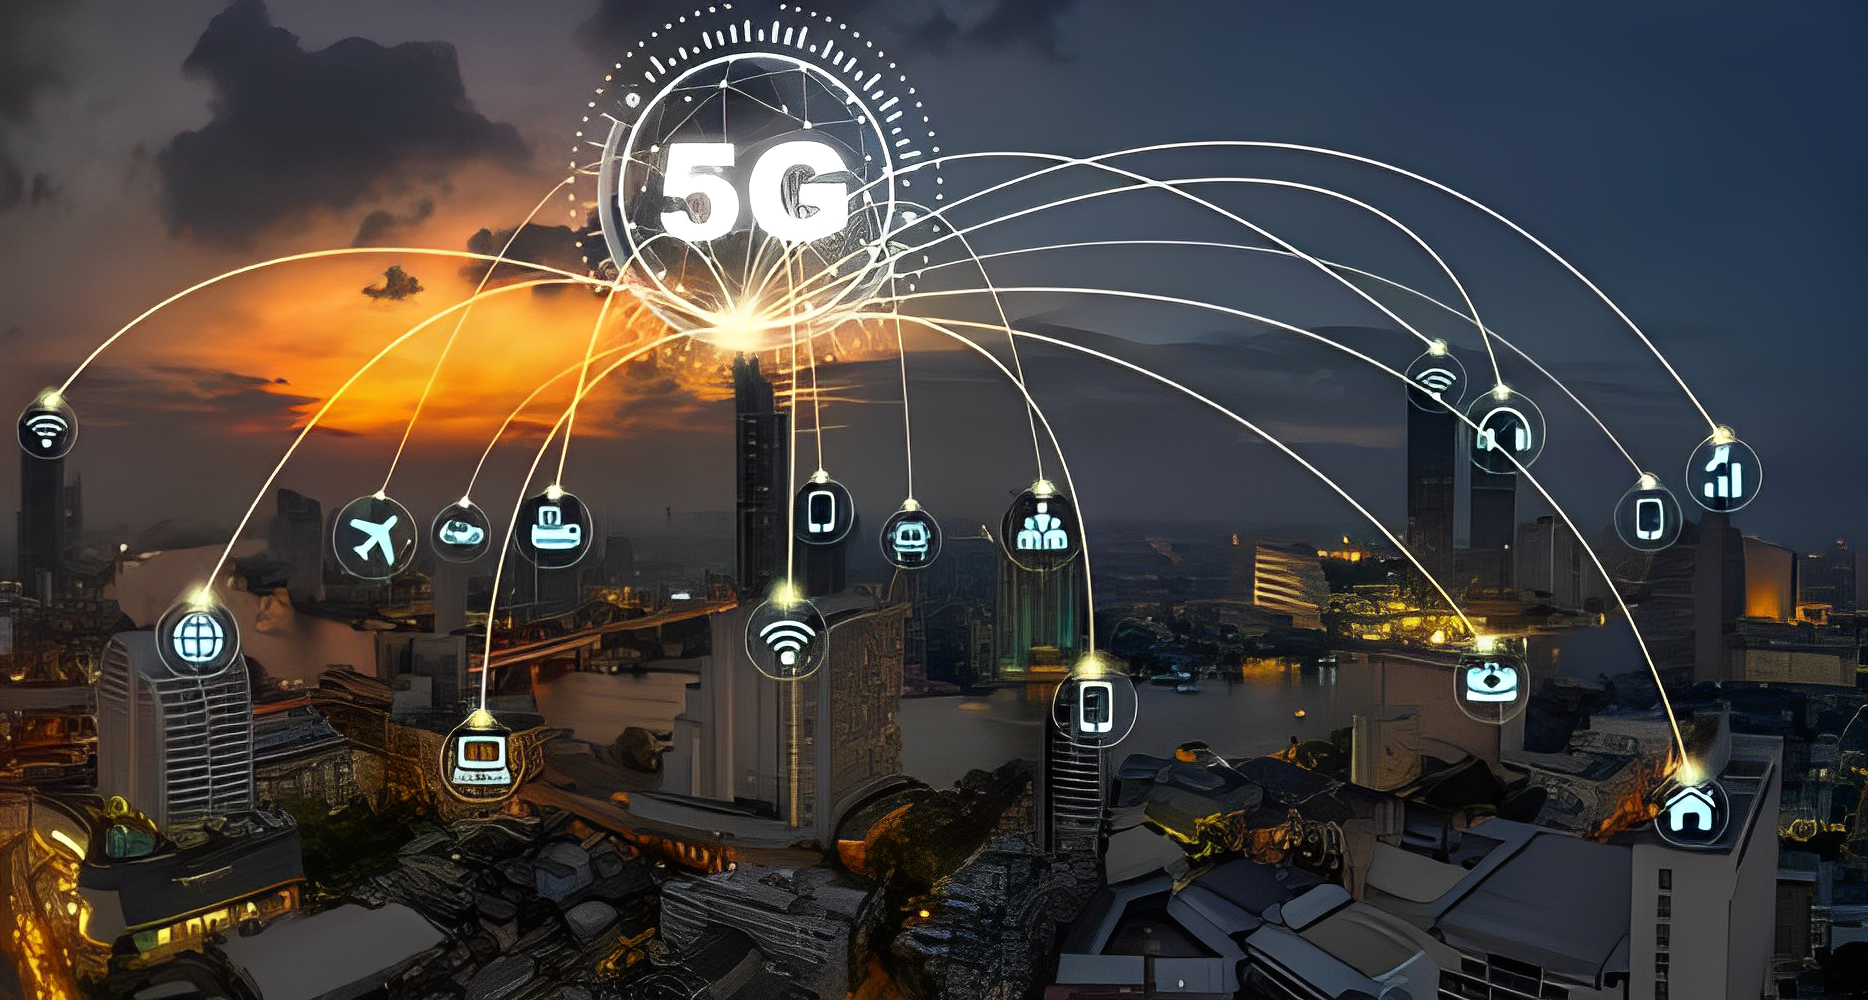 5G Technology Explained What You Need to Know LSI Keywords 5G Infrastructure Internet of Things (IoT) 5G Networks Technical Overview 5G Applications Health Risks of 5G 5G Security